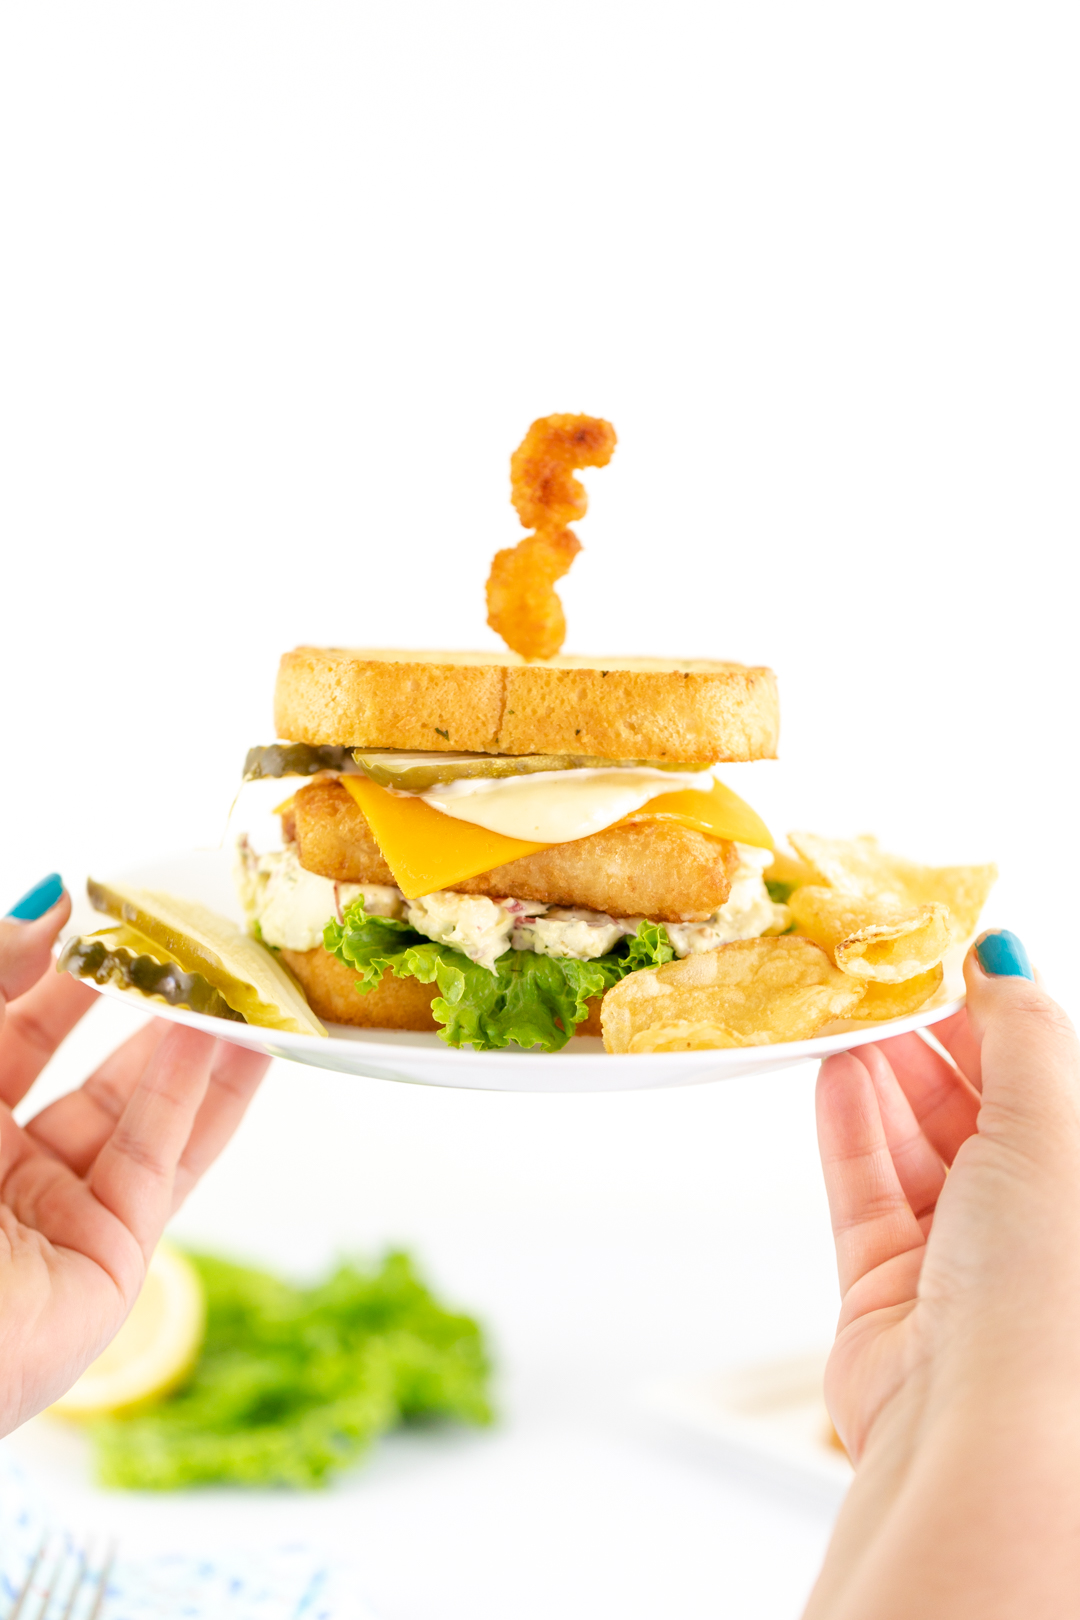 Easy Family Dinner. Over the top Fish Sandwiches made with red bliss potato salad and garlic mayo.